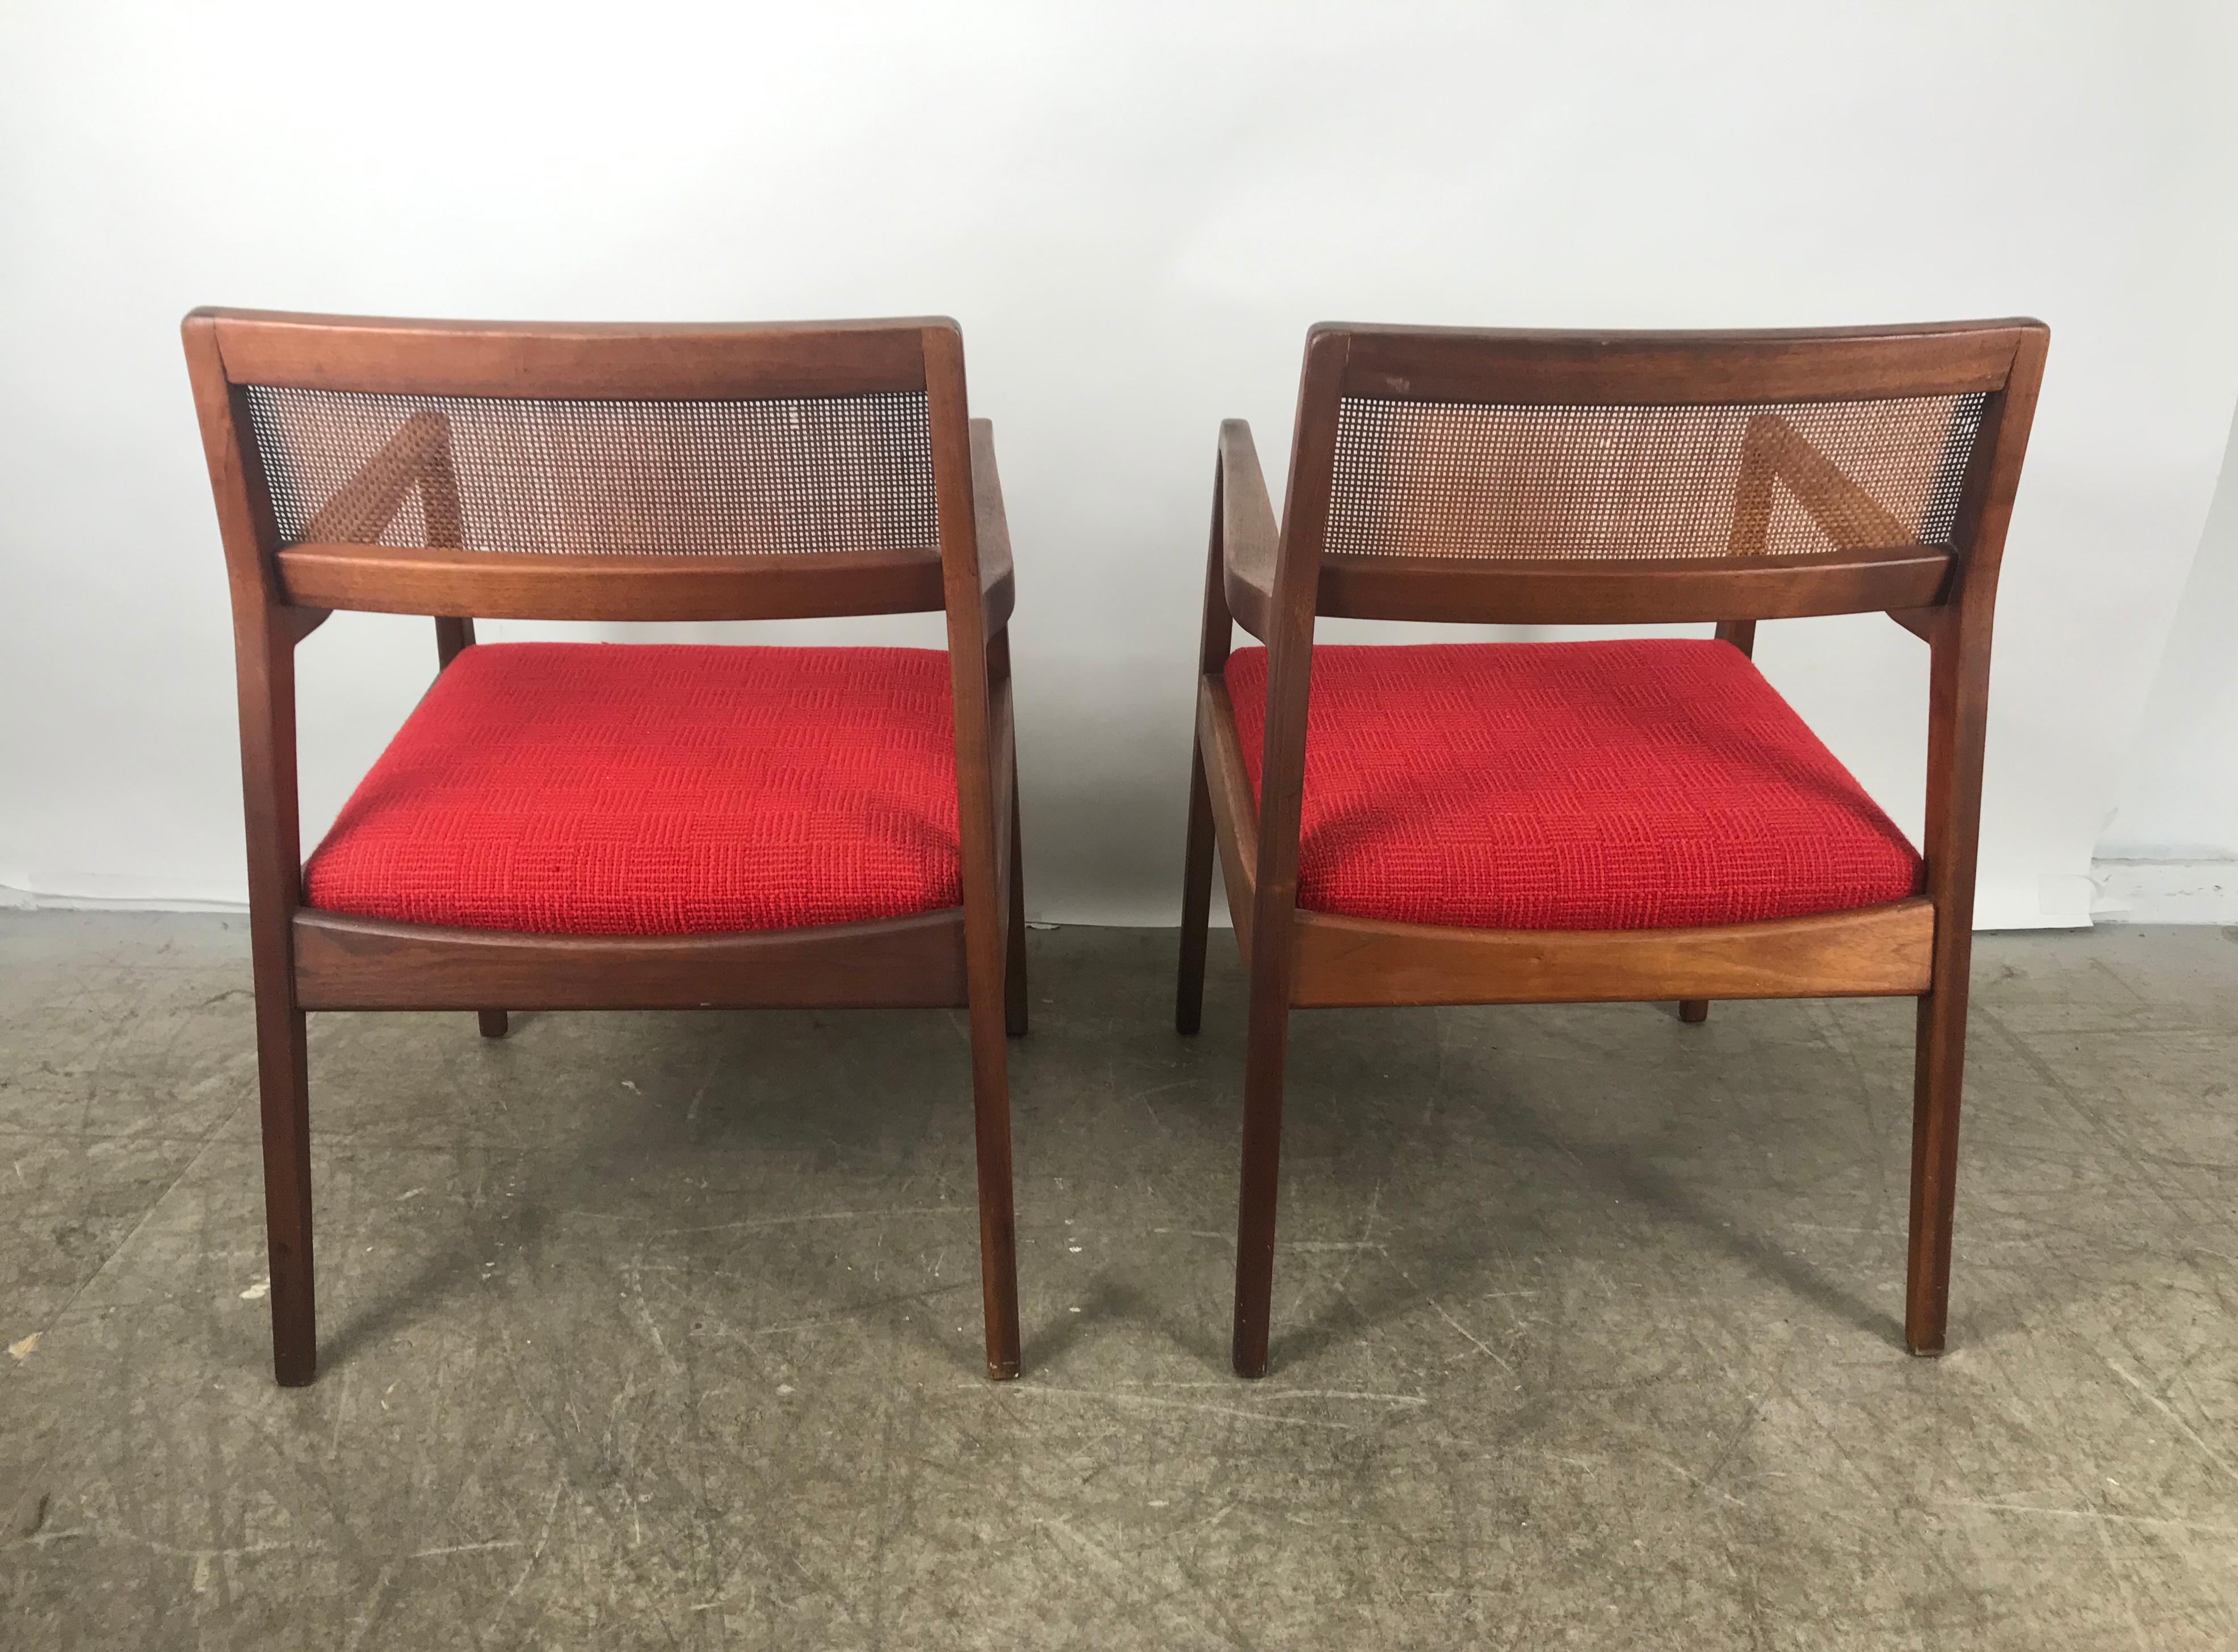 Fabric Matched Pair of Modernist Jens Risom Walnut and Caned Back Lounge Chair